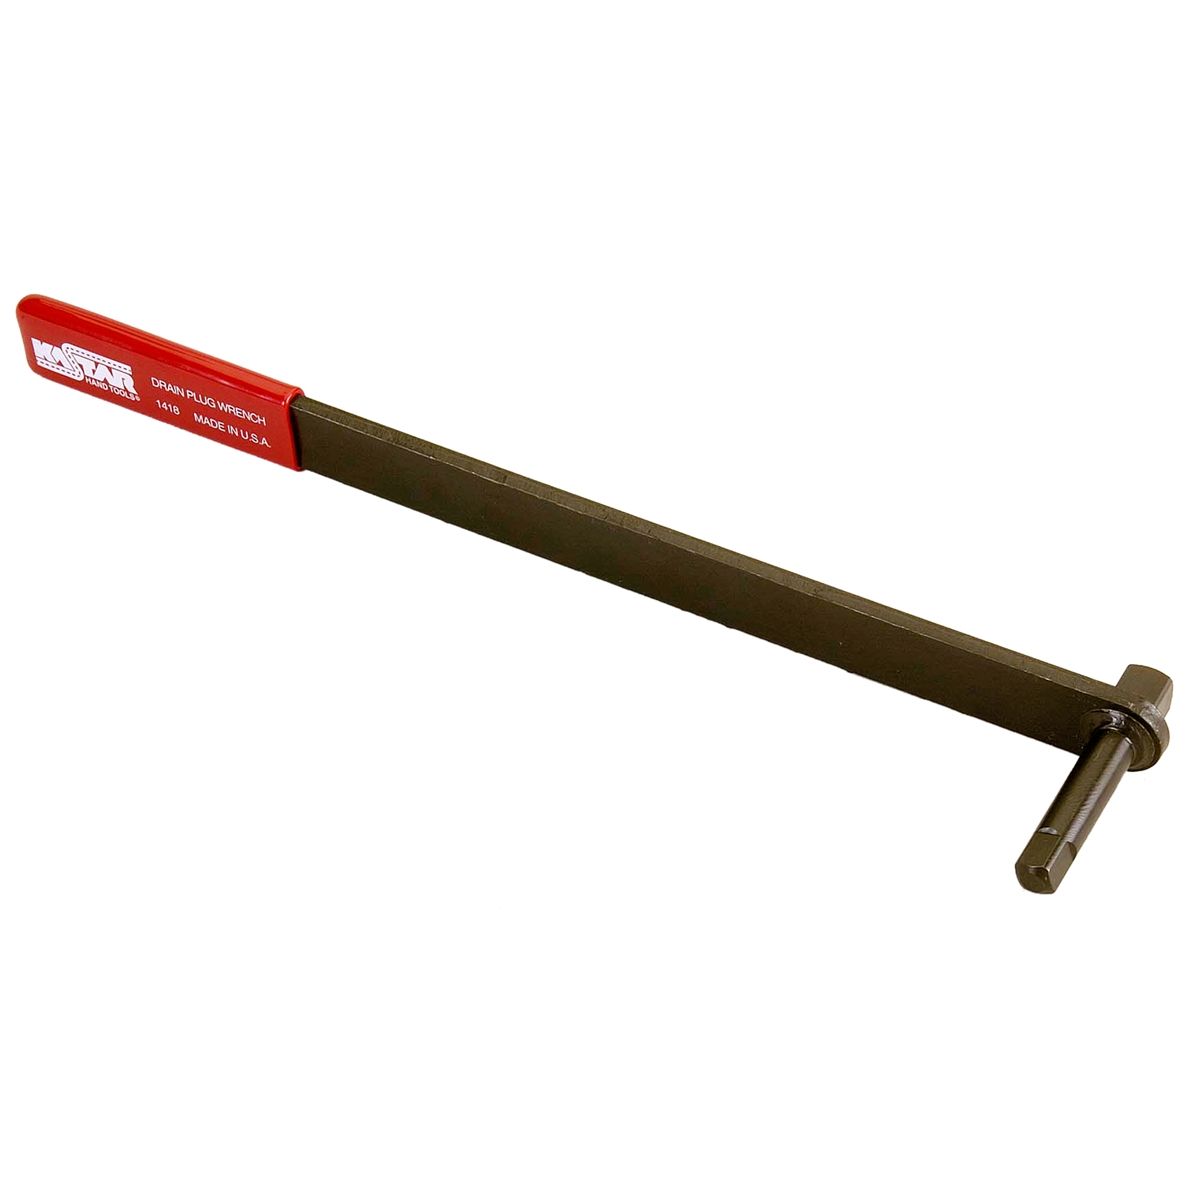 Wrenches HDX Pop-up Plug Wrench Hdx148 for sale online 